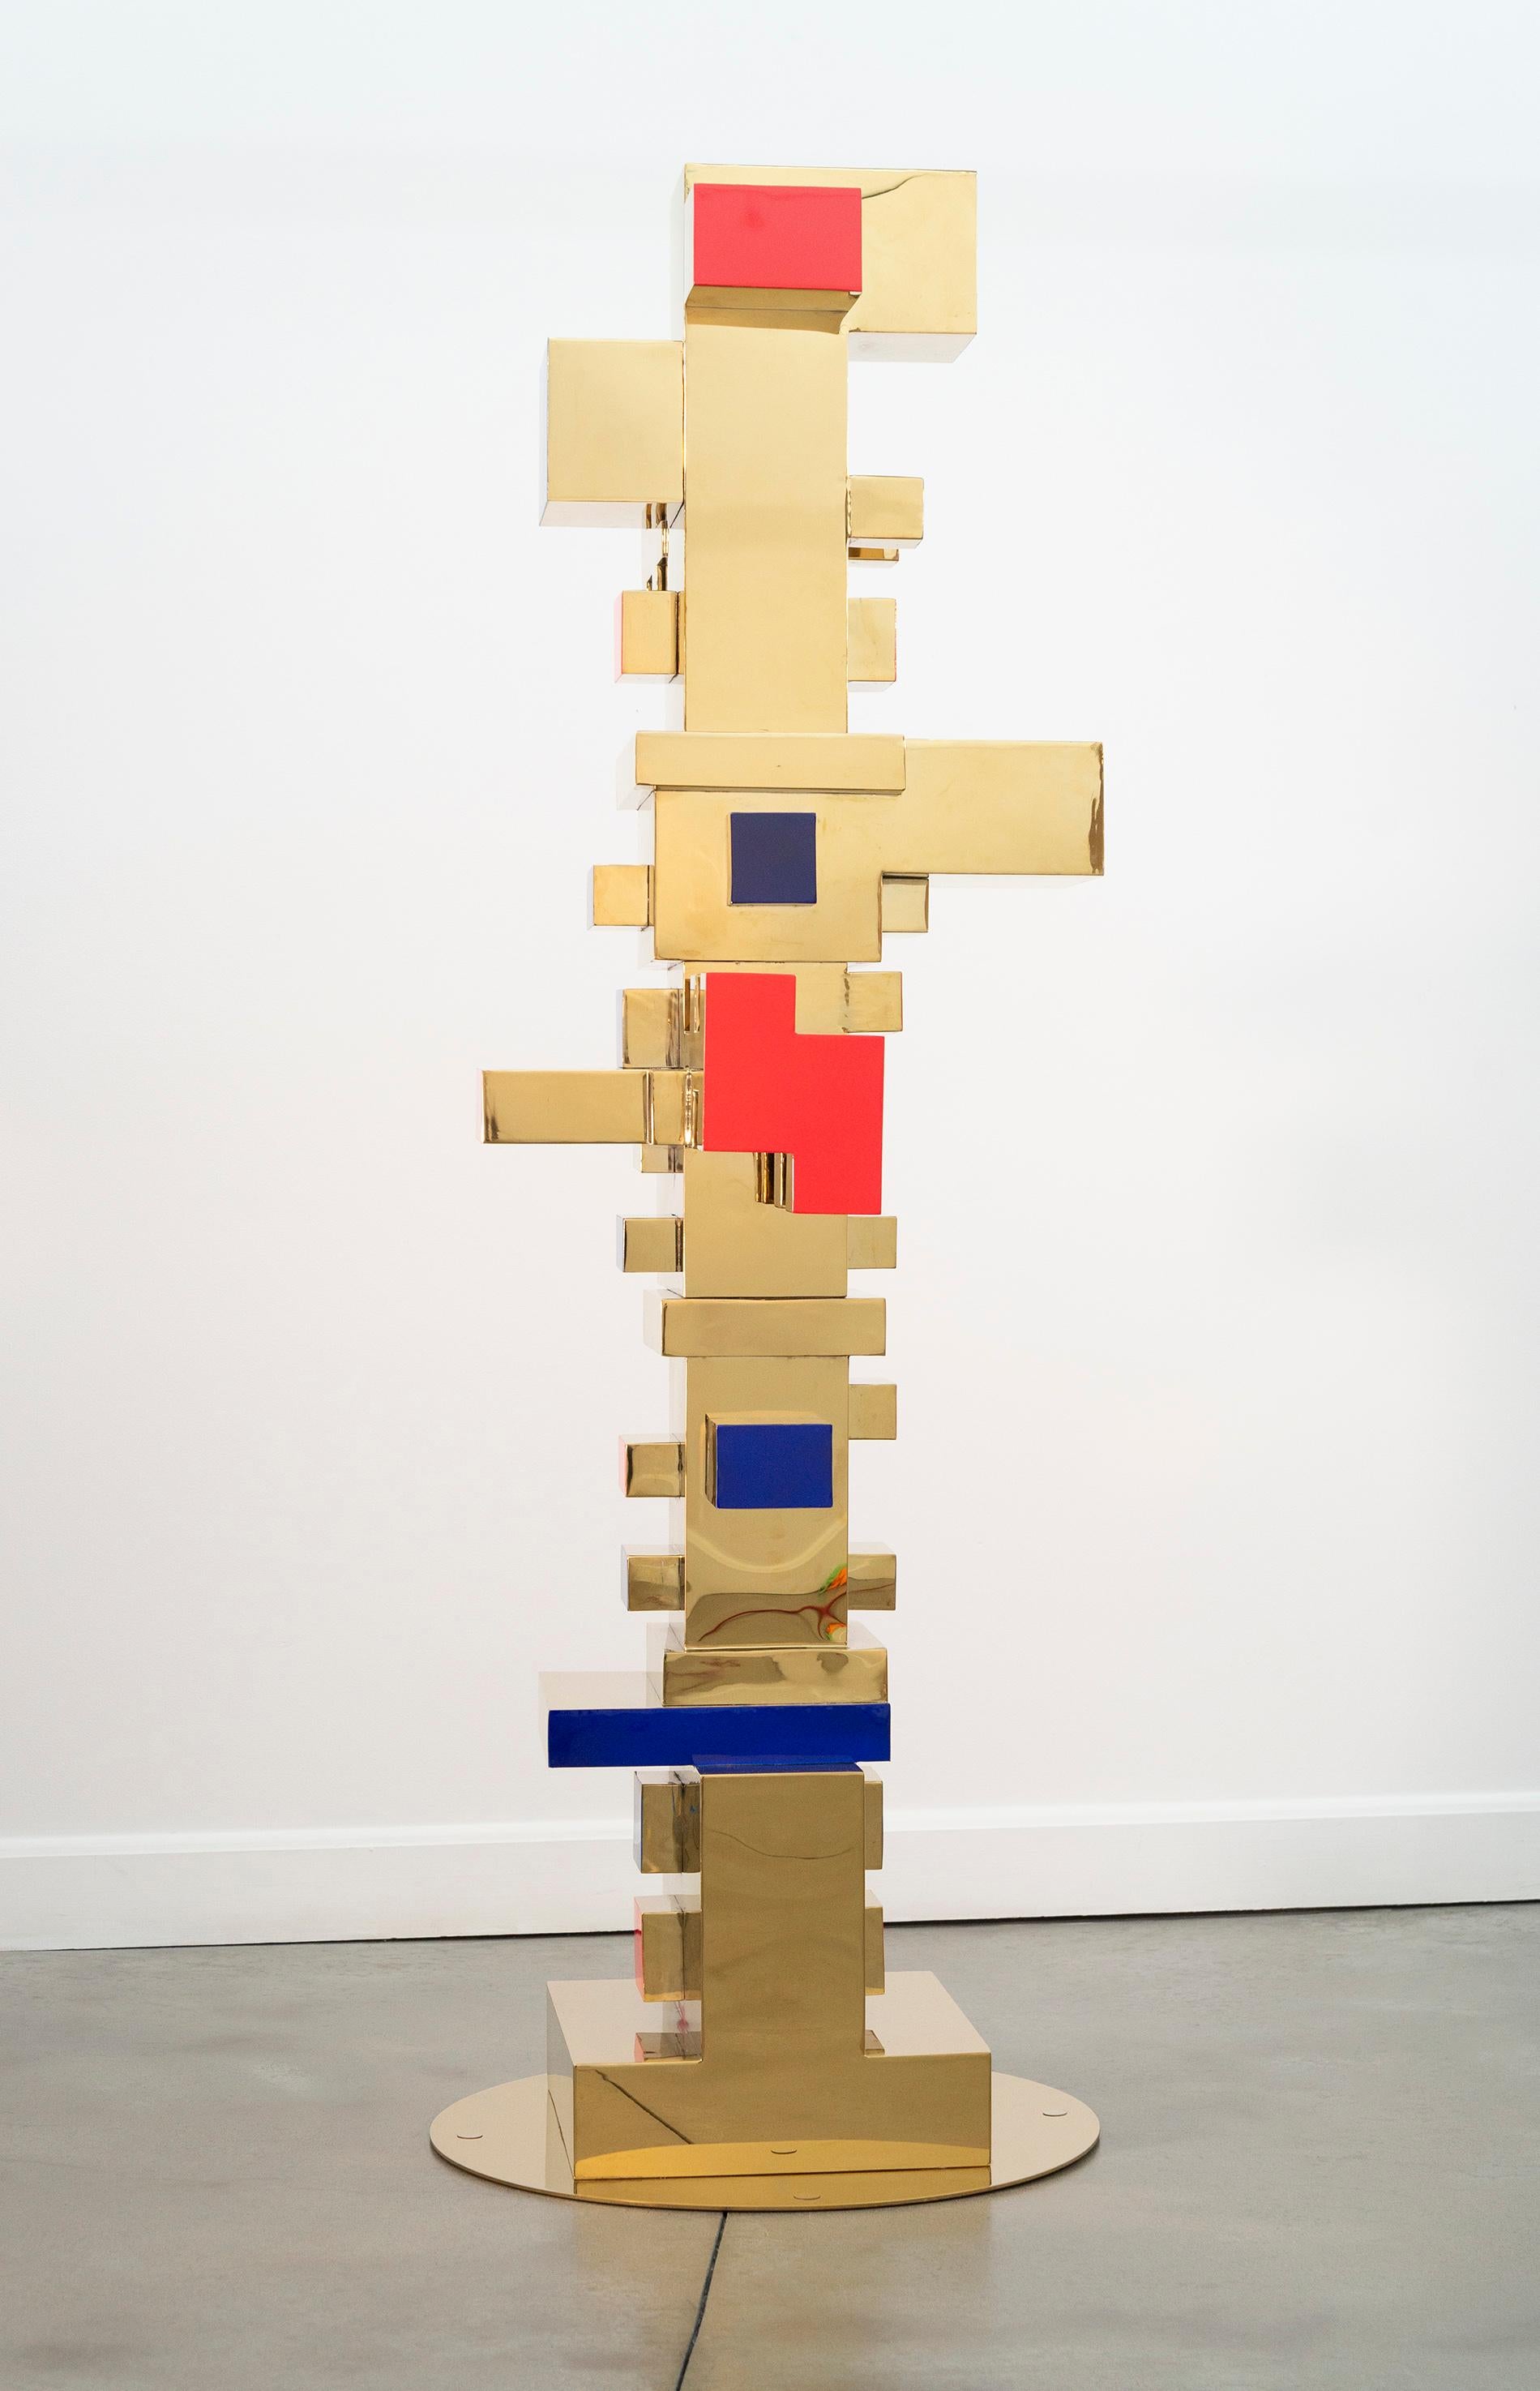 Stacked Blocks - Gold, Red, Blue - totem, gold plated, stainless steel sculpture - Contemporary Sculpture by Viktor Mitic